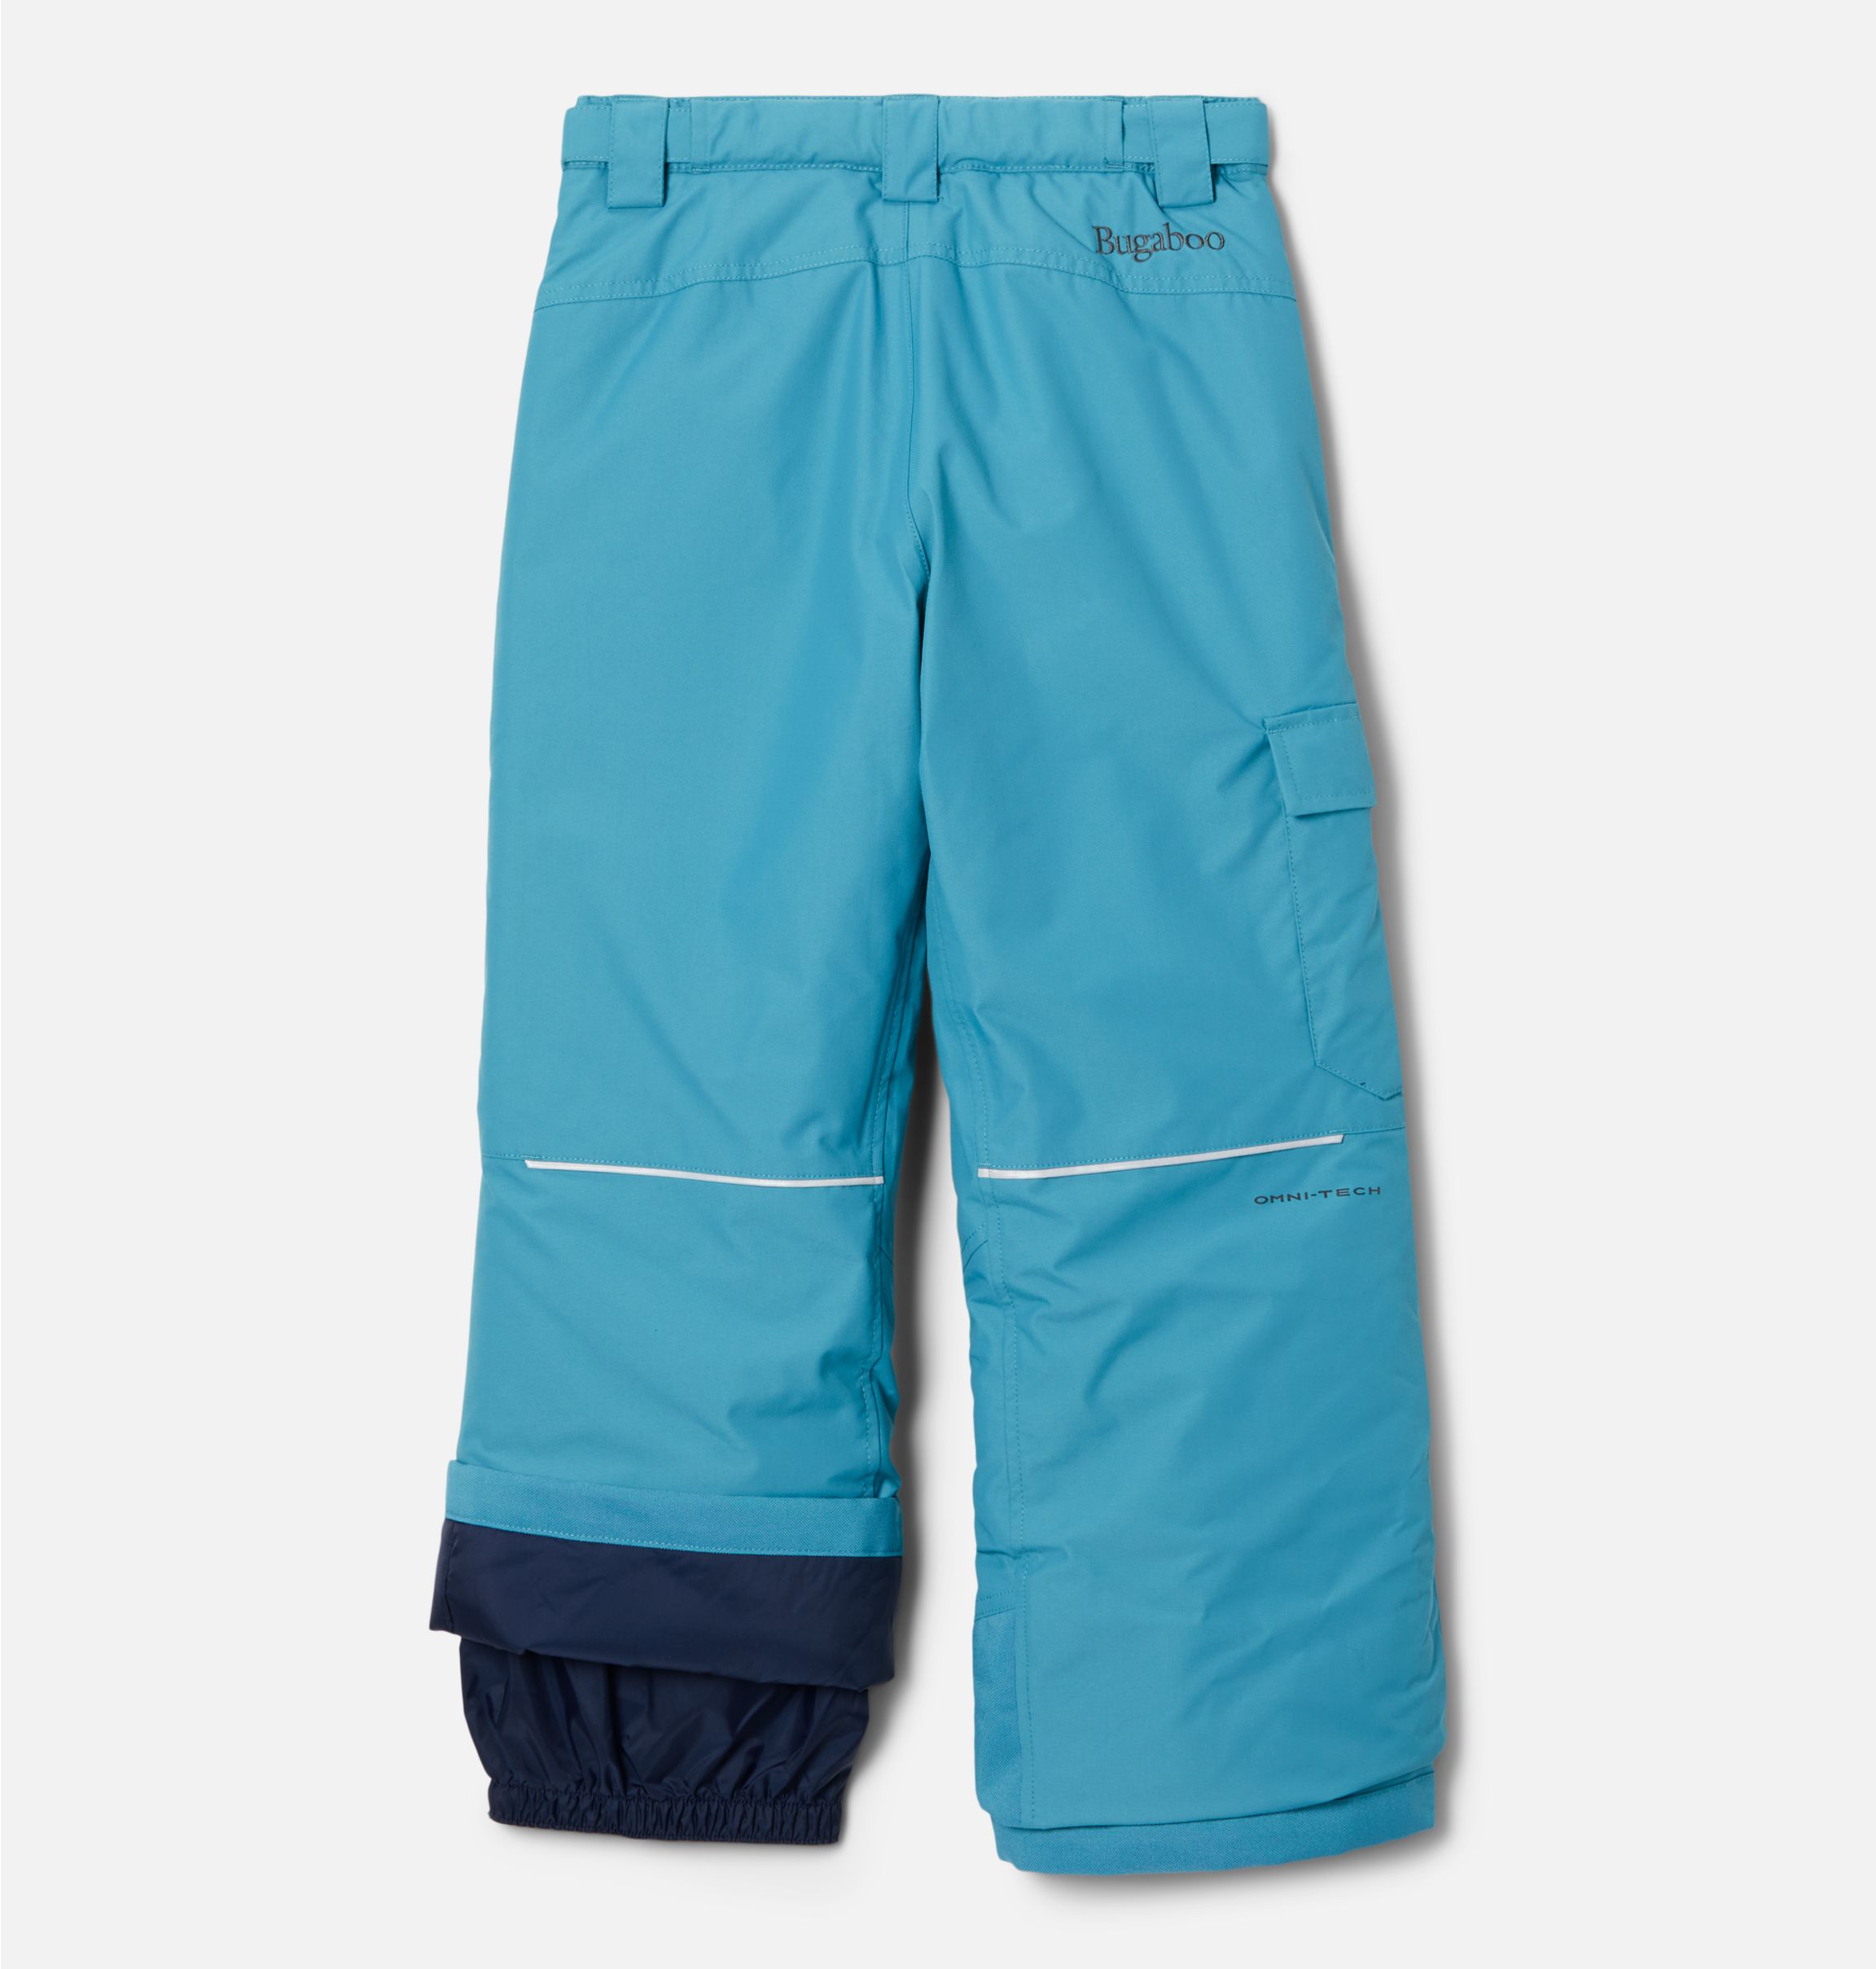 Columbia Freestyle™ Pant for Kids at Sporting Life